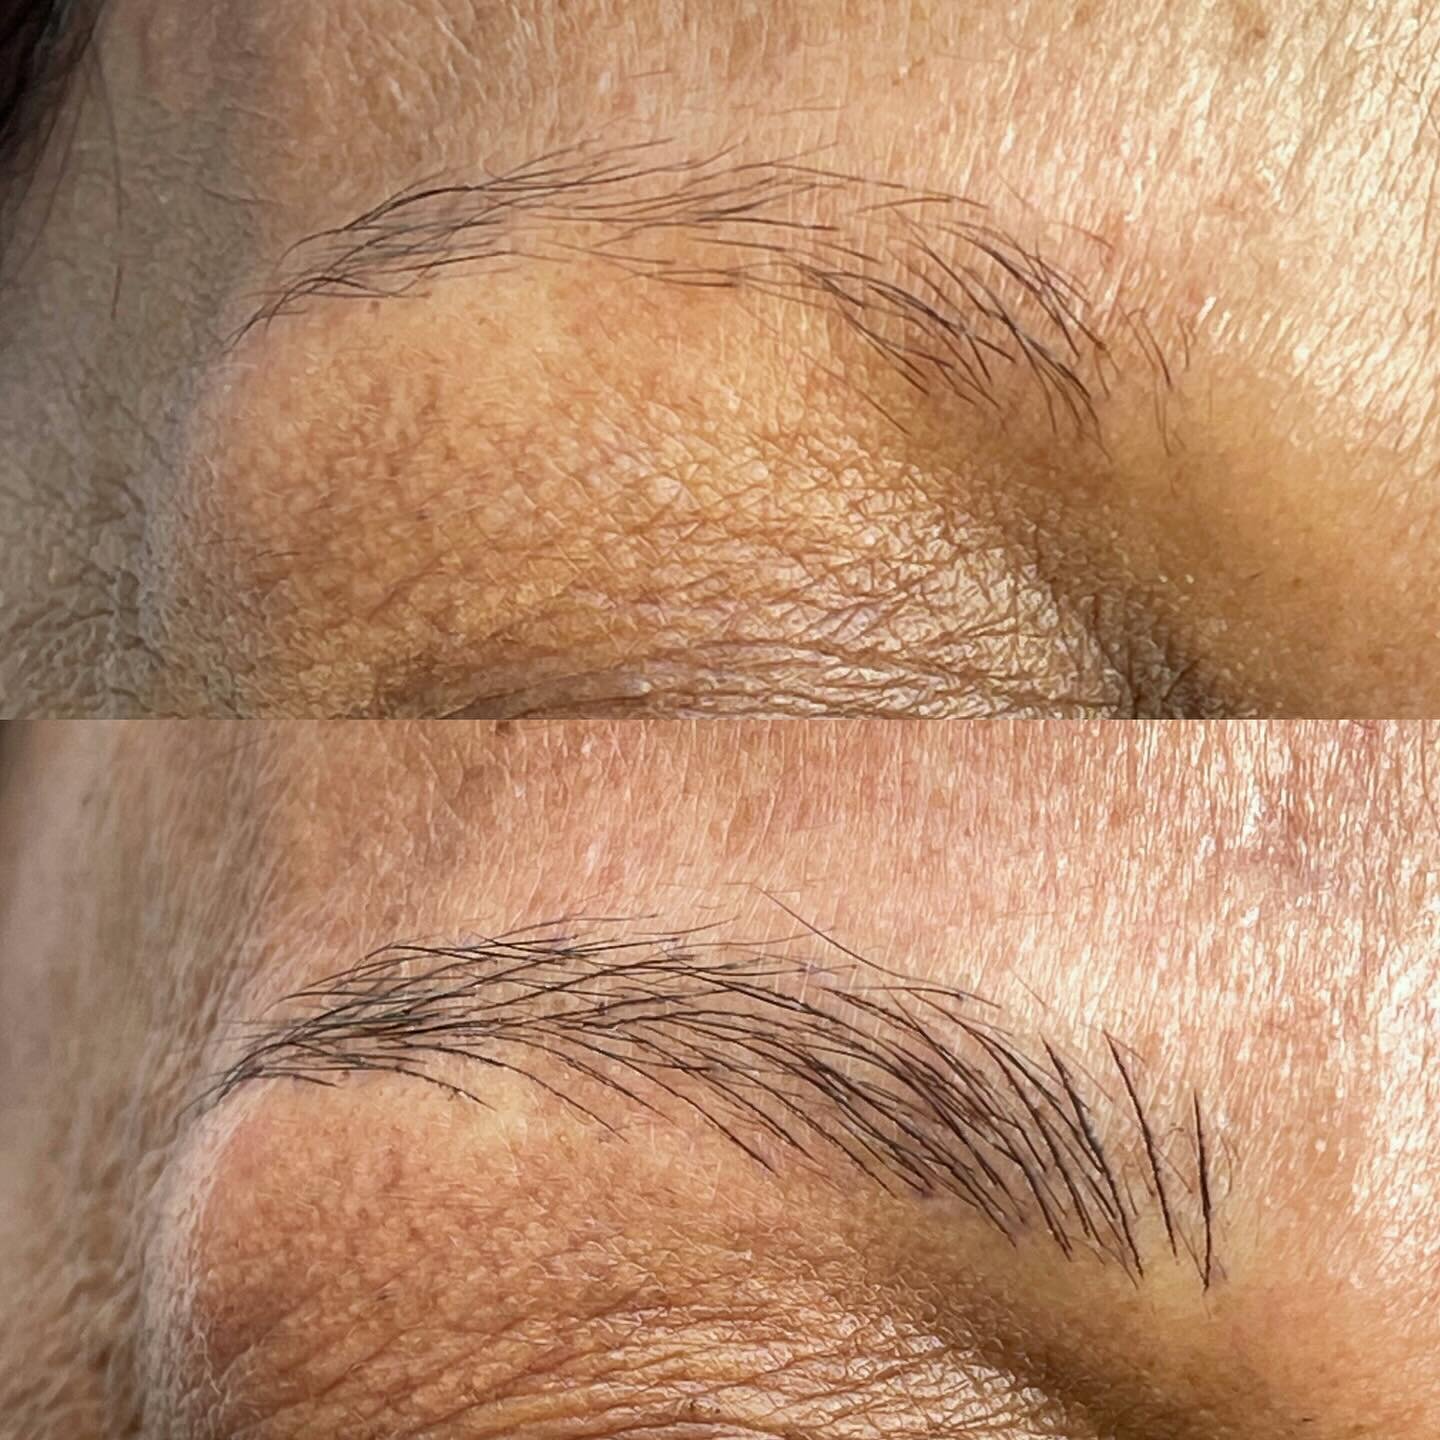 ✨First session of building these brows. More density and shape but still natural✨💕

Go to link in bio to book your appointment🖤

⏳Length of appointment: 2.5- 3 hours 
❤️&zwj;🩹Pain level: 2 topical numbing agents used to ensure your comfort 
🩹Heal